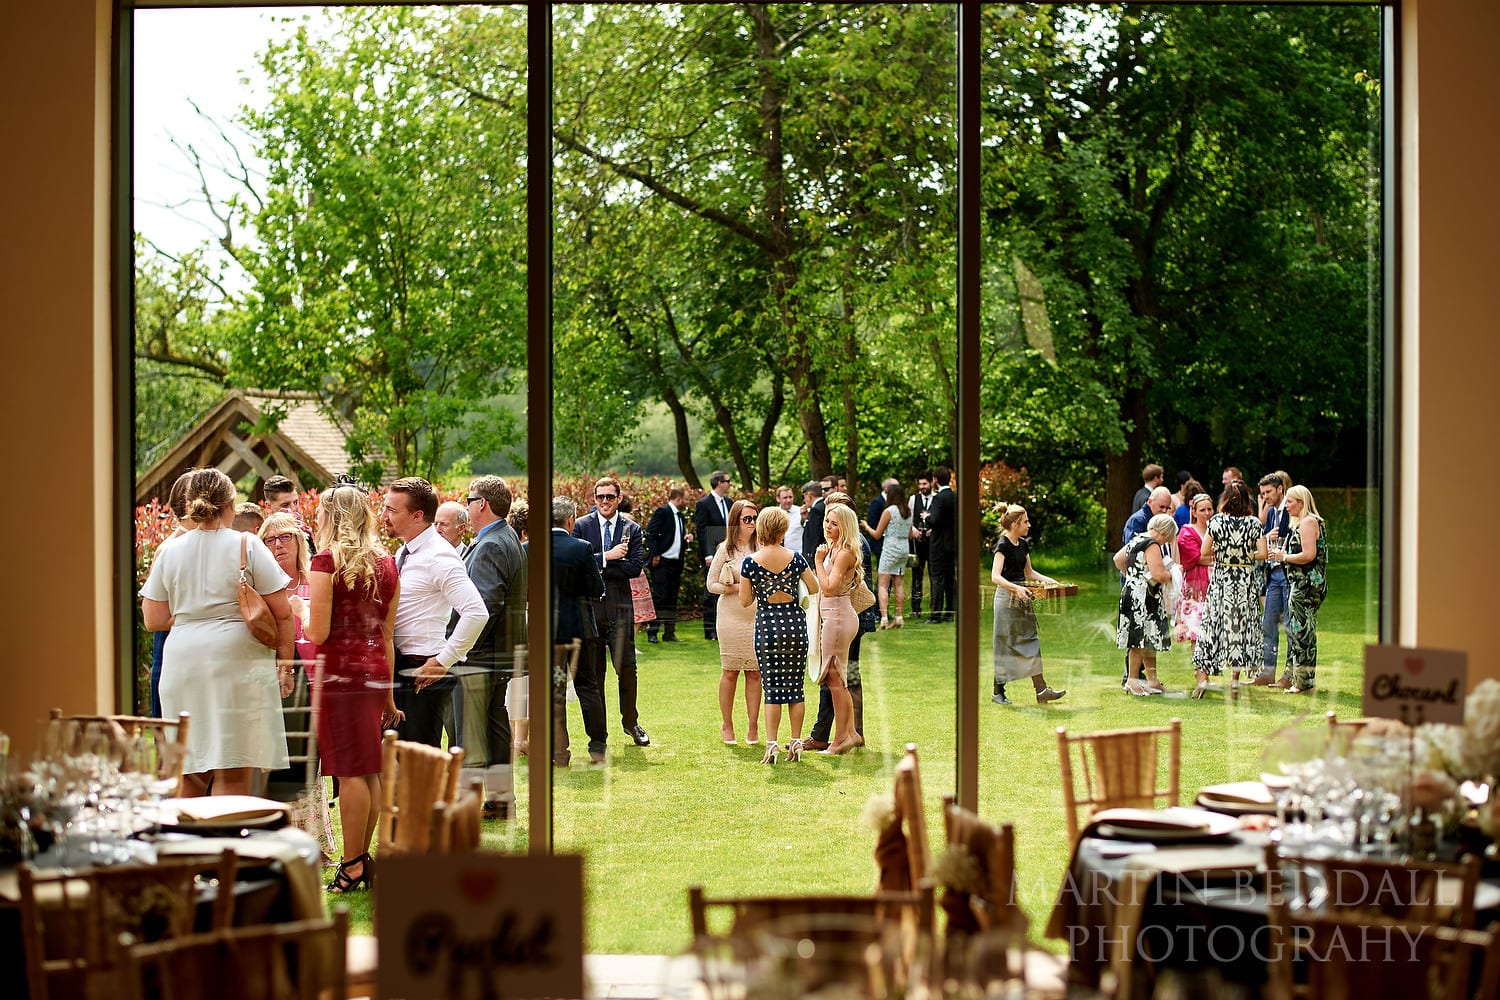 Guests on the lawn at Millbridge Court wedding reception